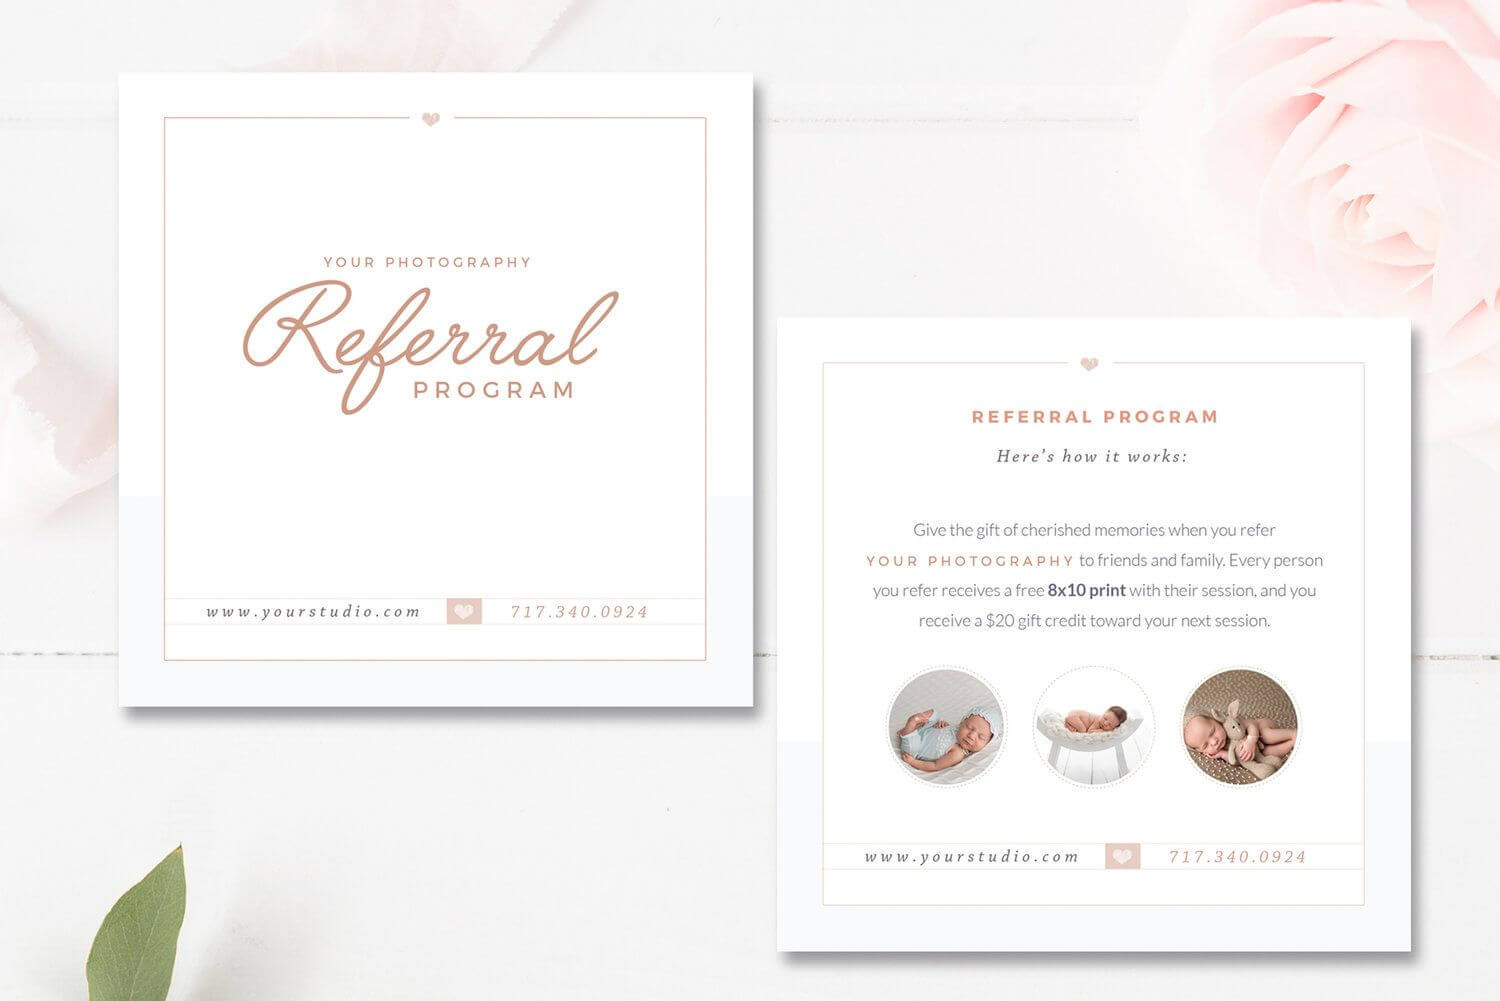 Photography Referral Card Templates, Referral Program Within Photography Referral Card Templates